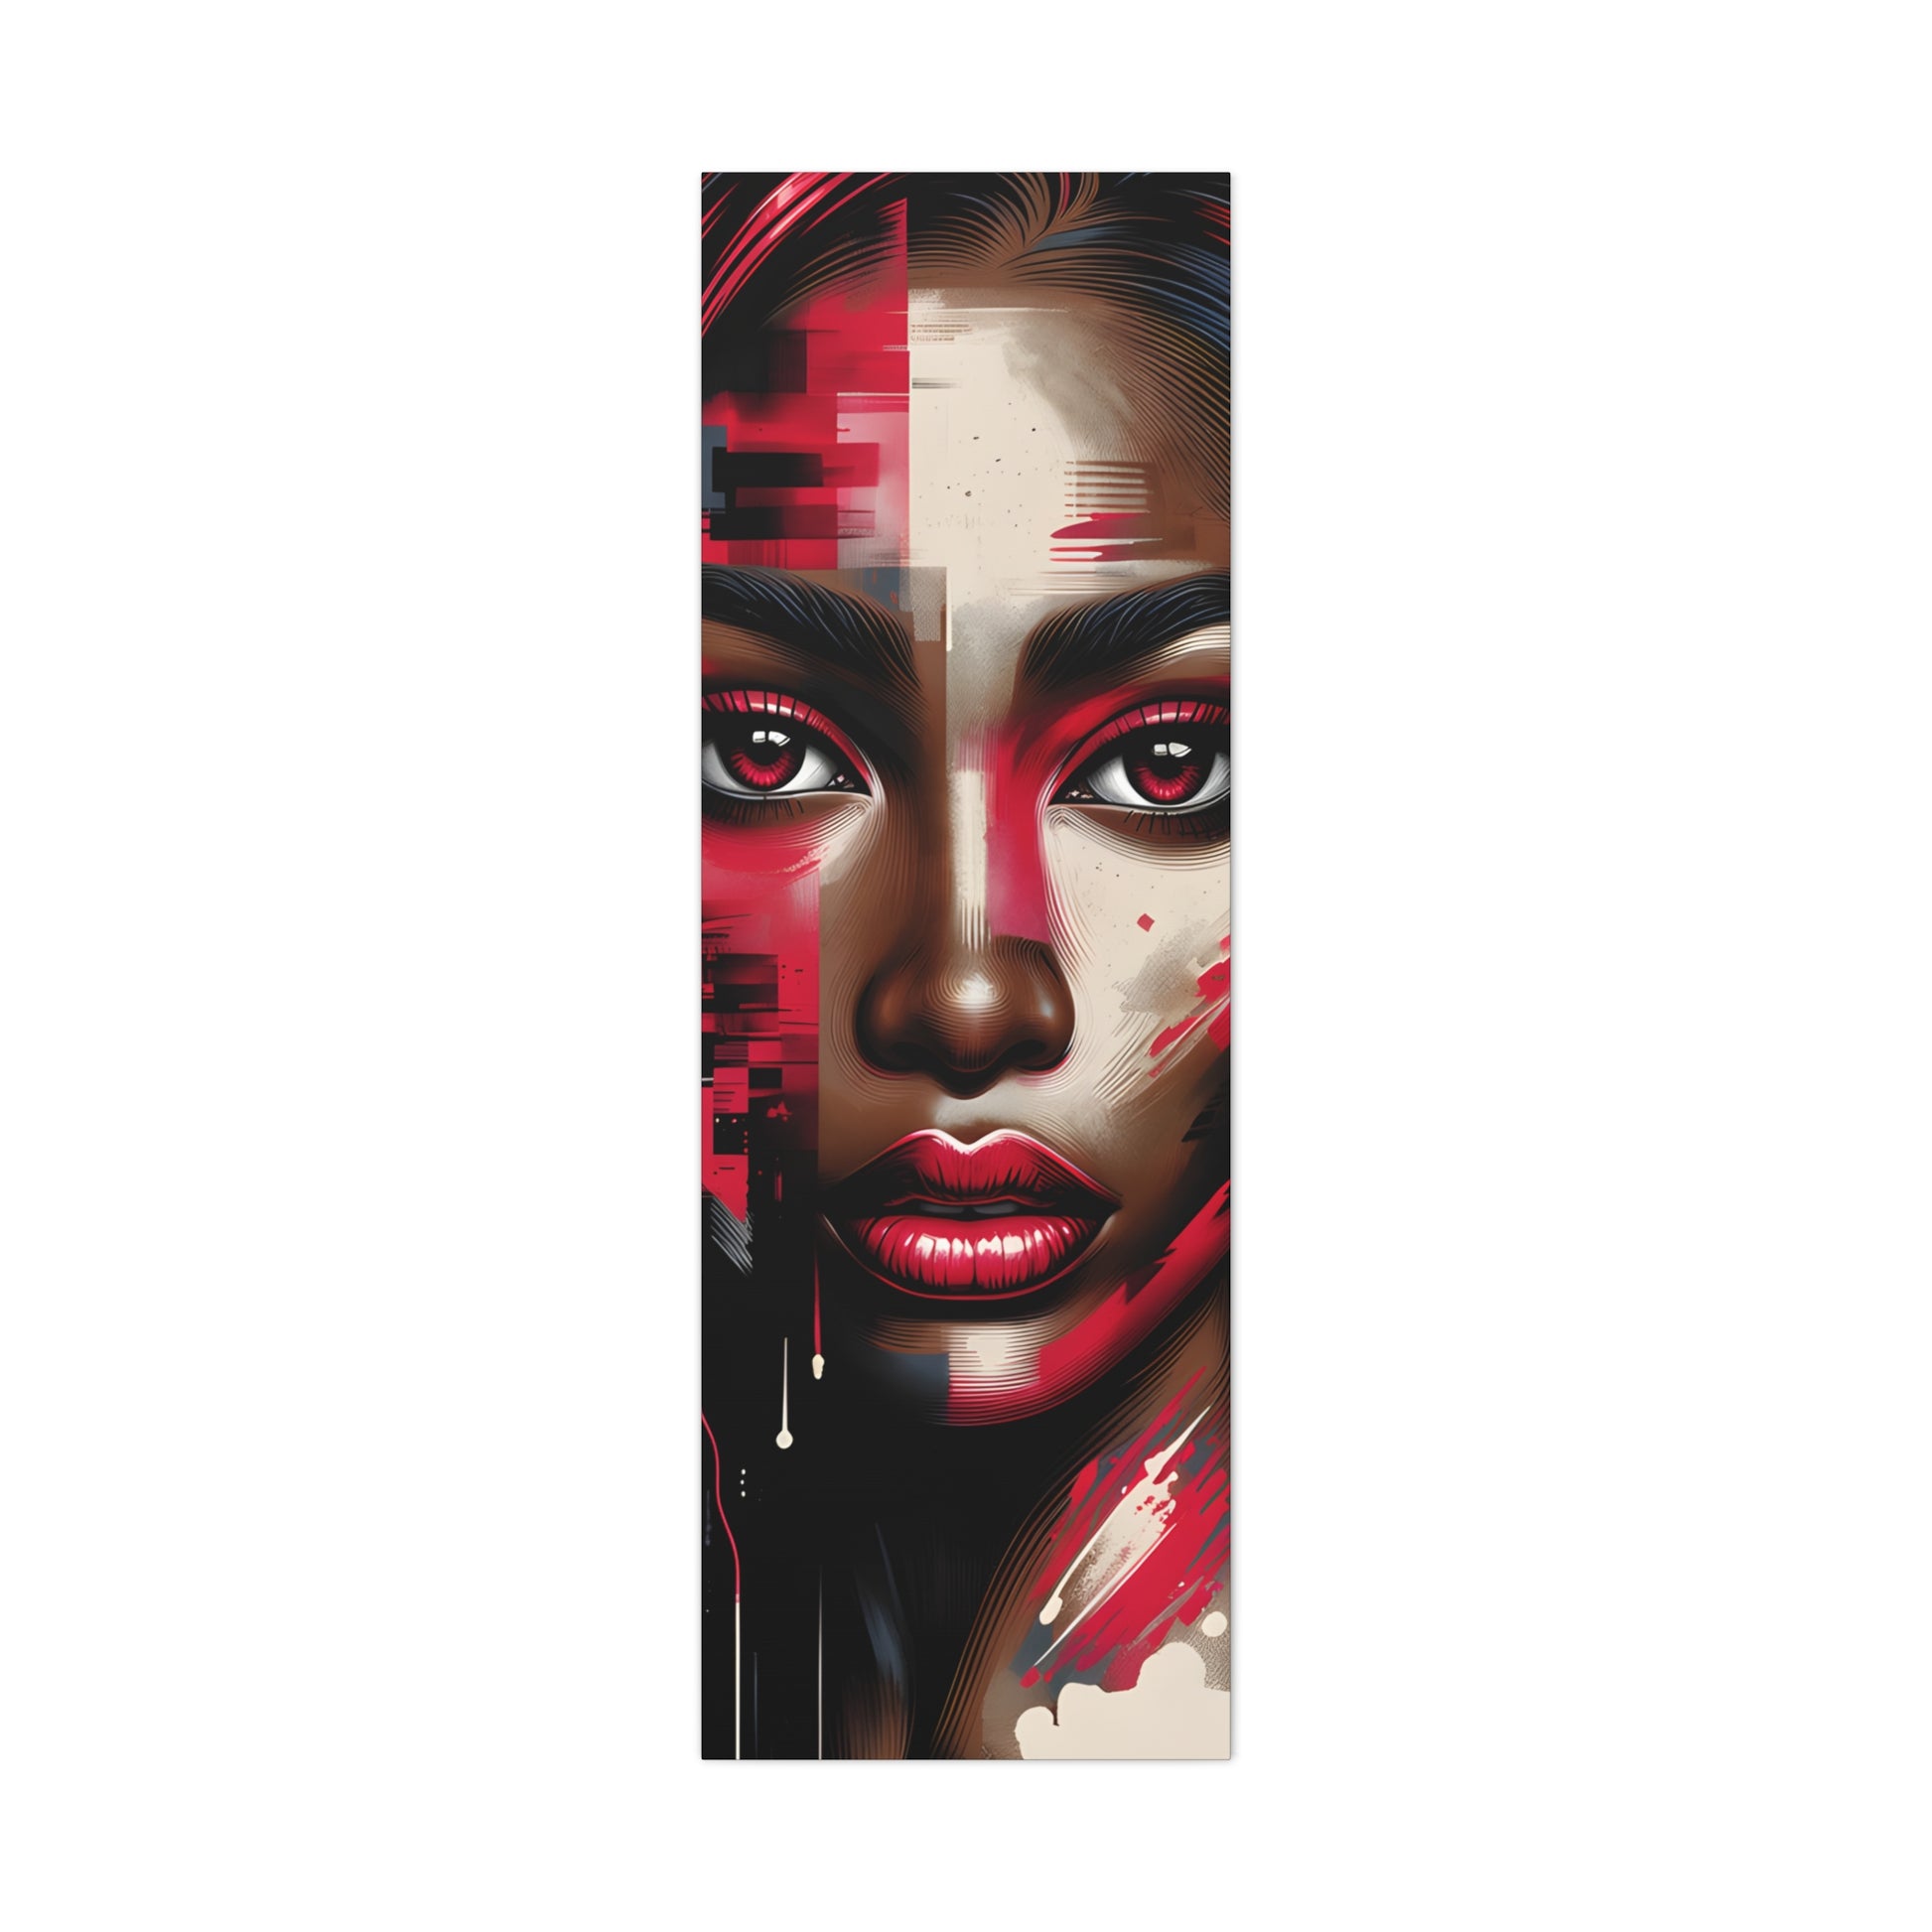 Digital portrait of an African American woman with striking red and pink hues on her face, dramatic red eyeshadow, and a captivating gaze, set against a street art backdrop with a drip effect. | EbMerized Creations